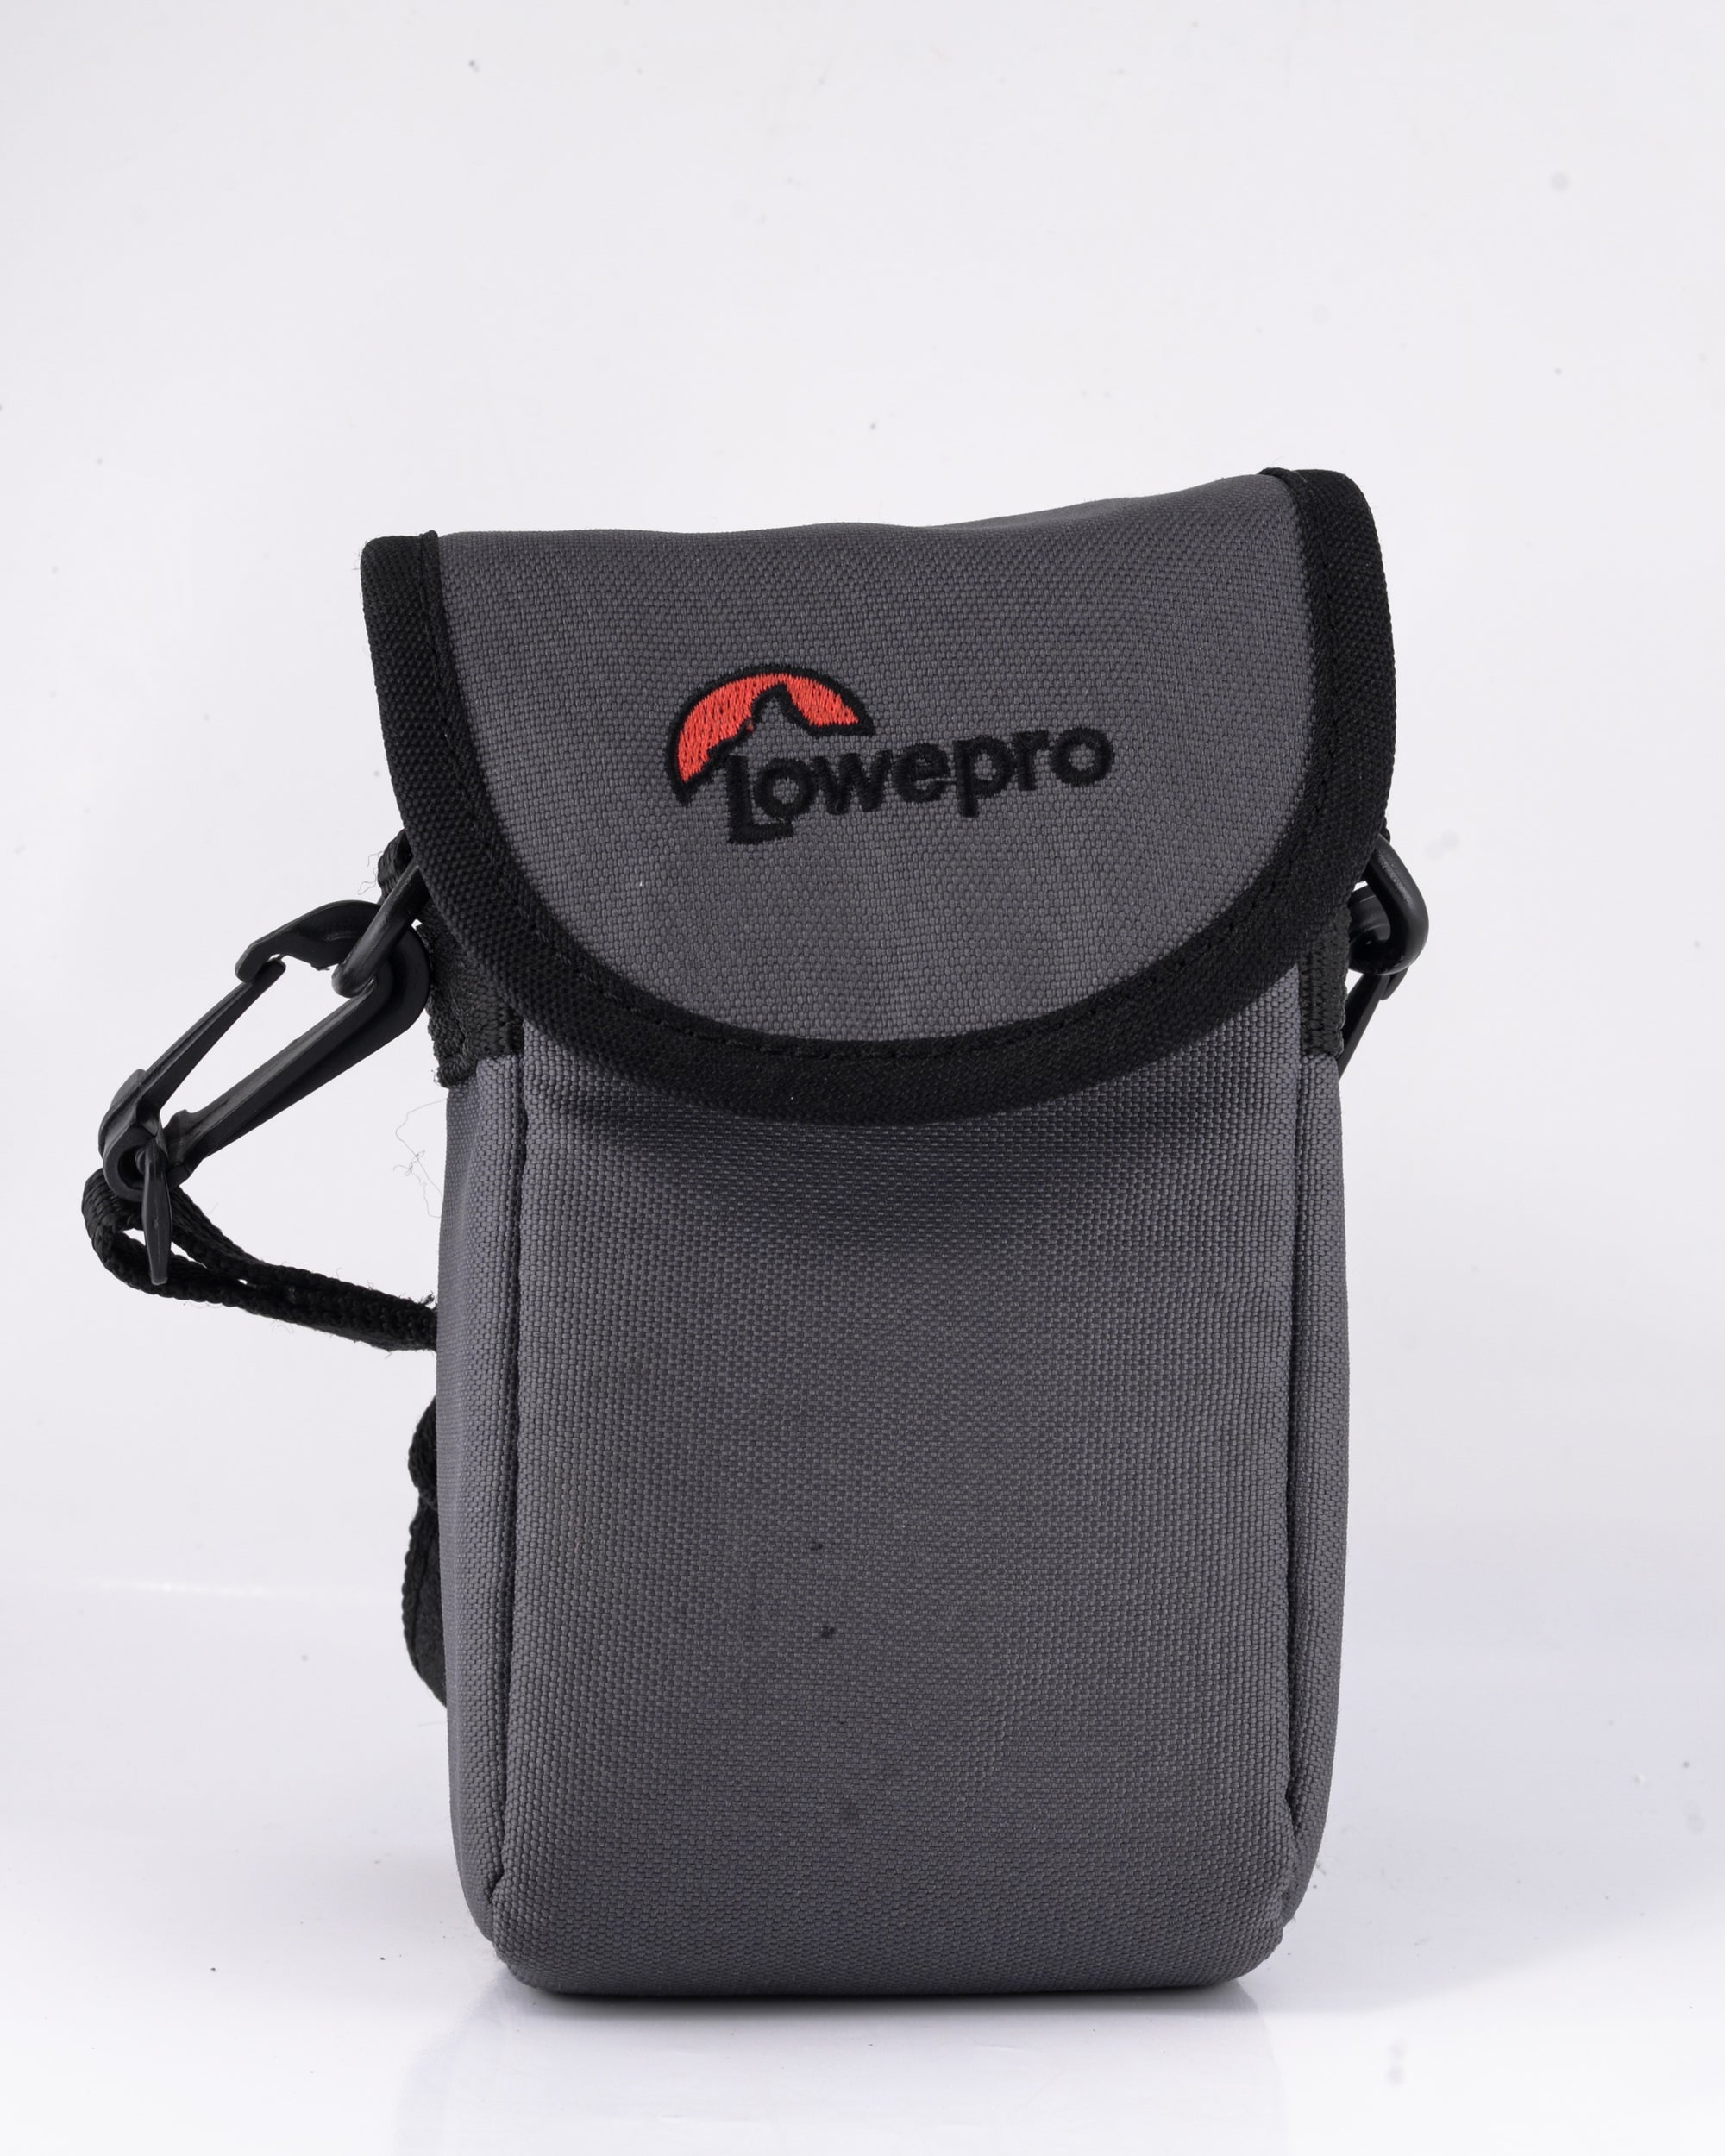 Vintage LOWEPRO Point & Shoot Pouch